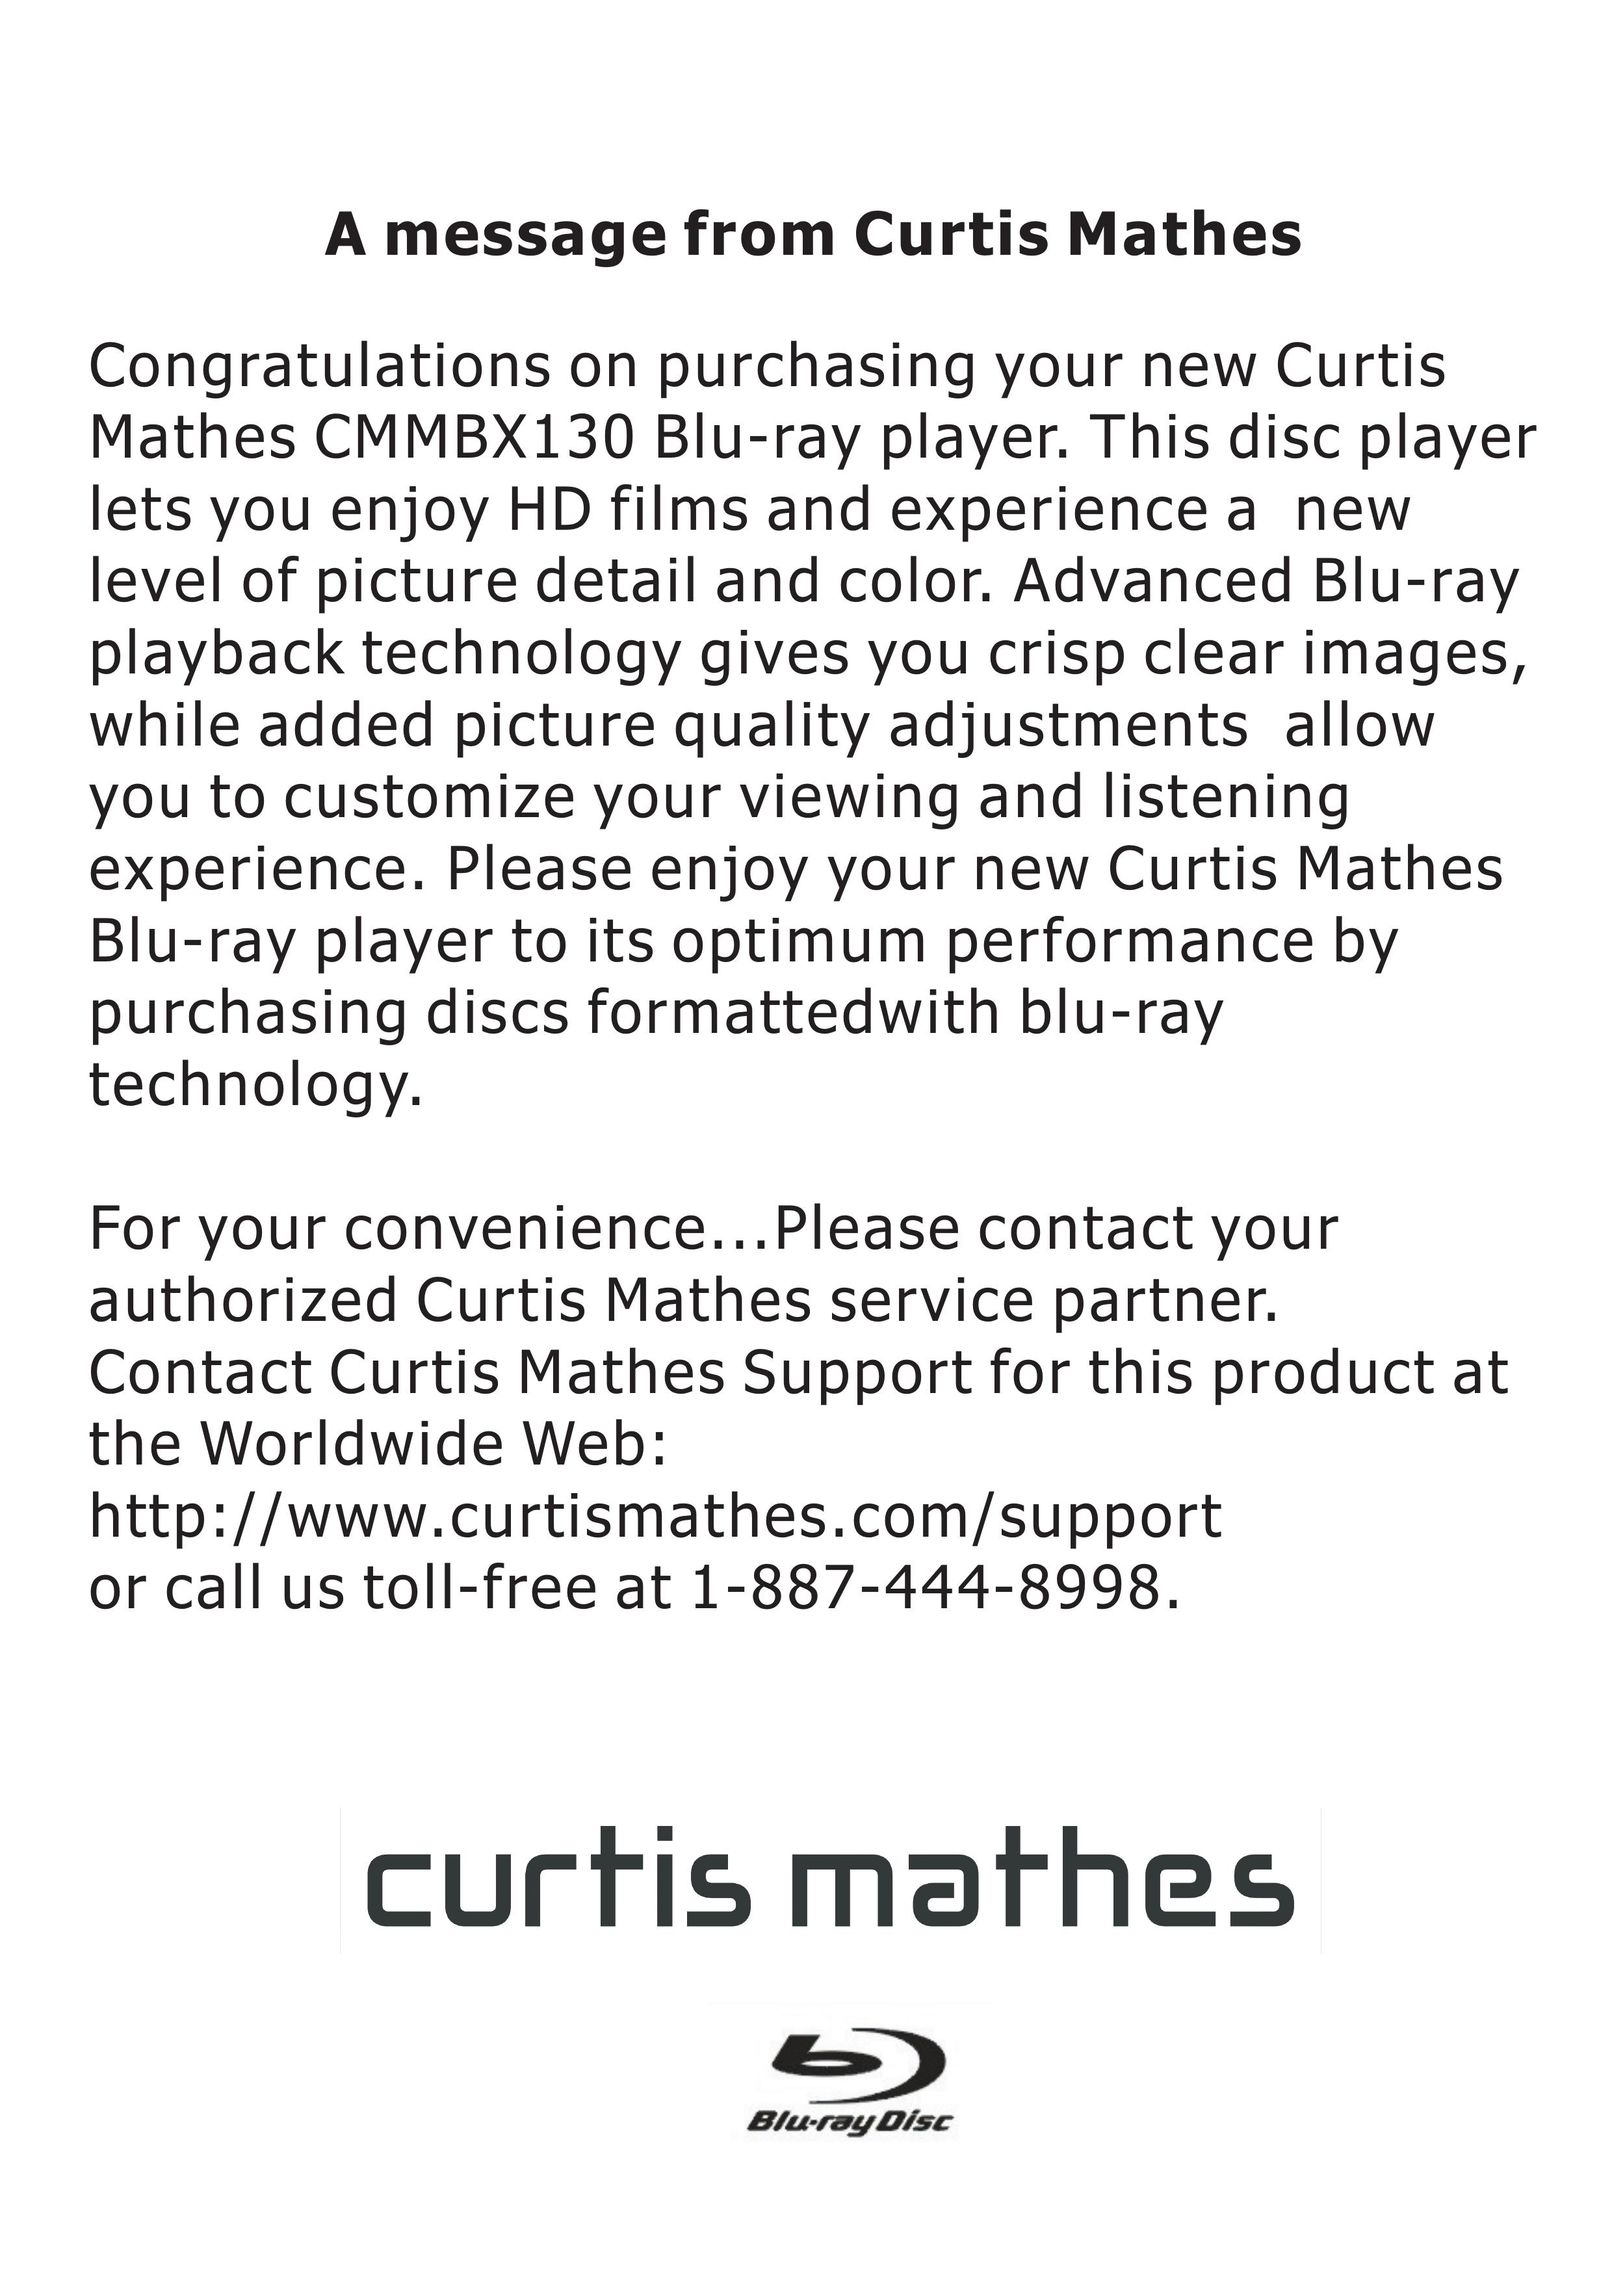 Curtis Mathes CMMBX130 Blu-ray Player User Manual (Page 2)